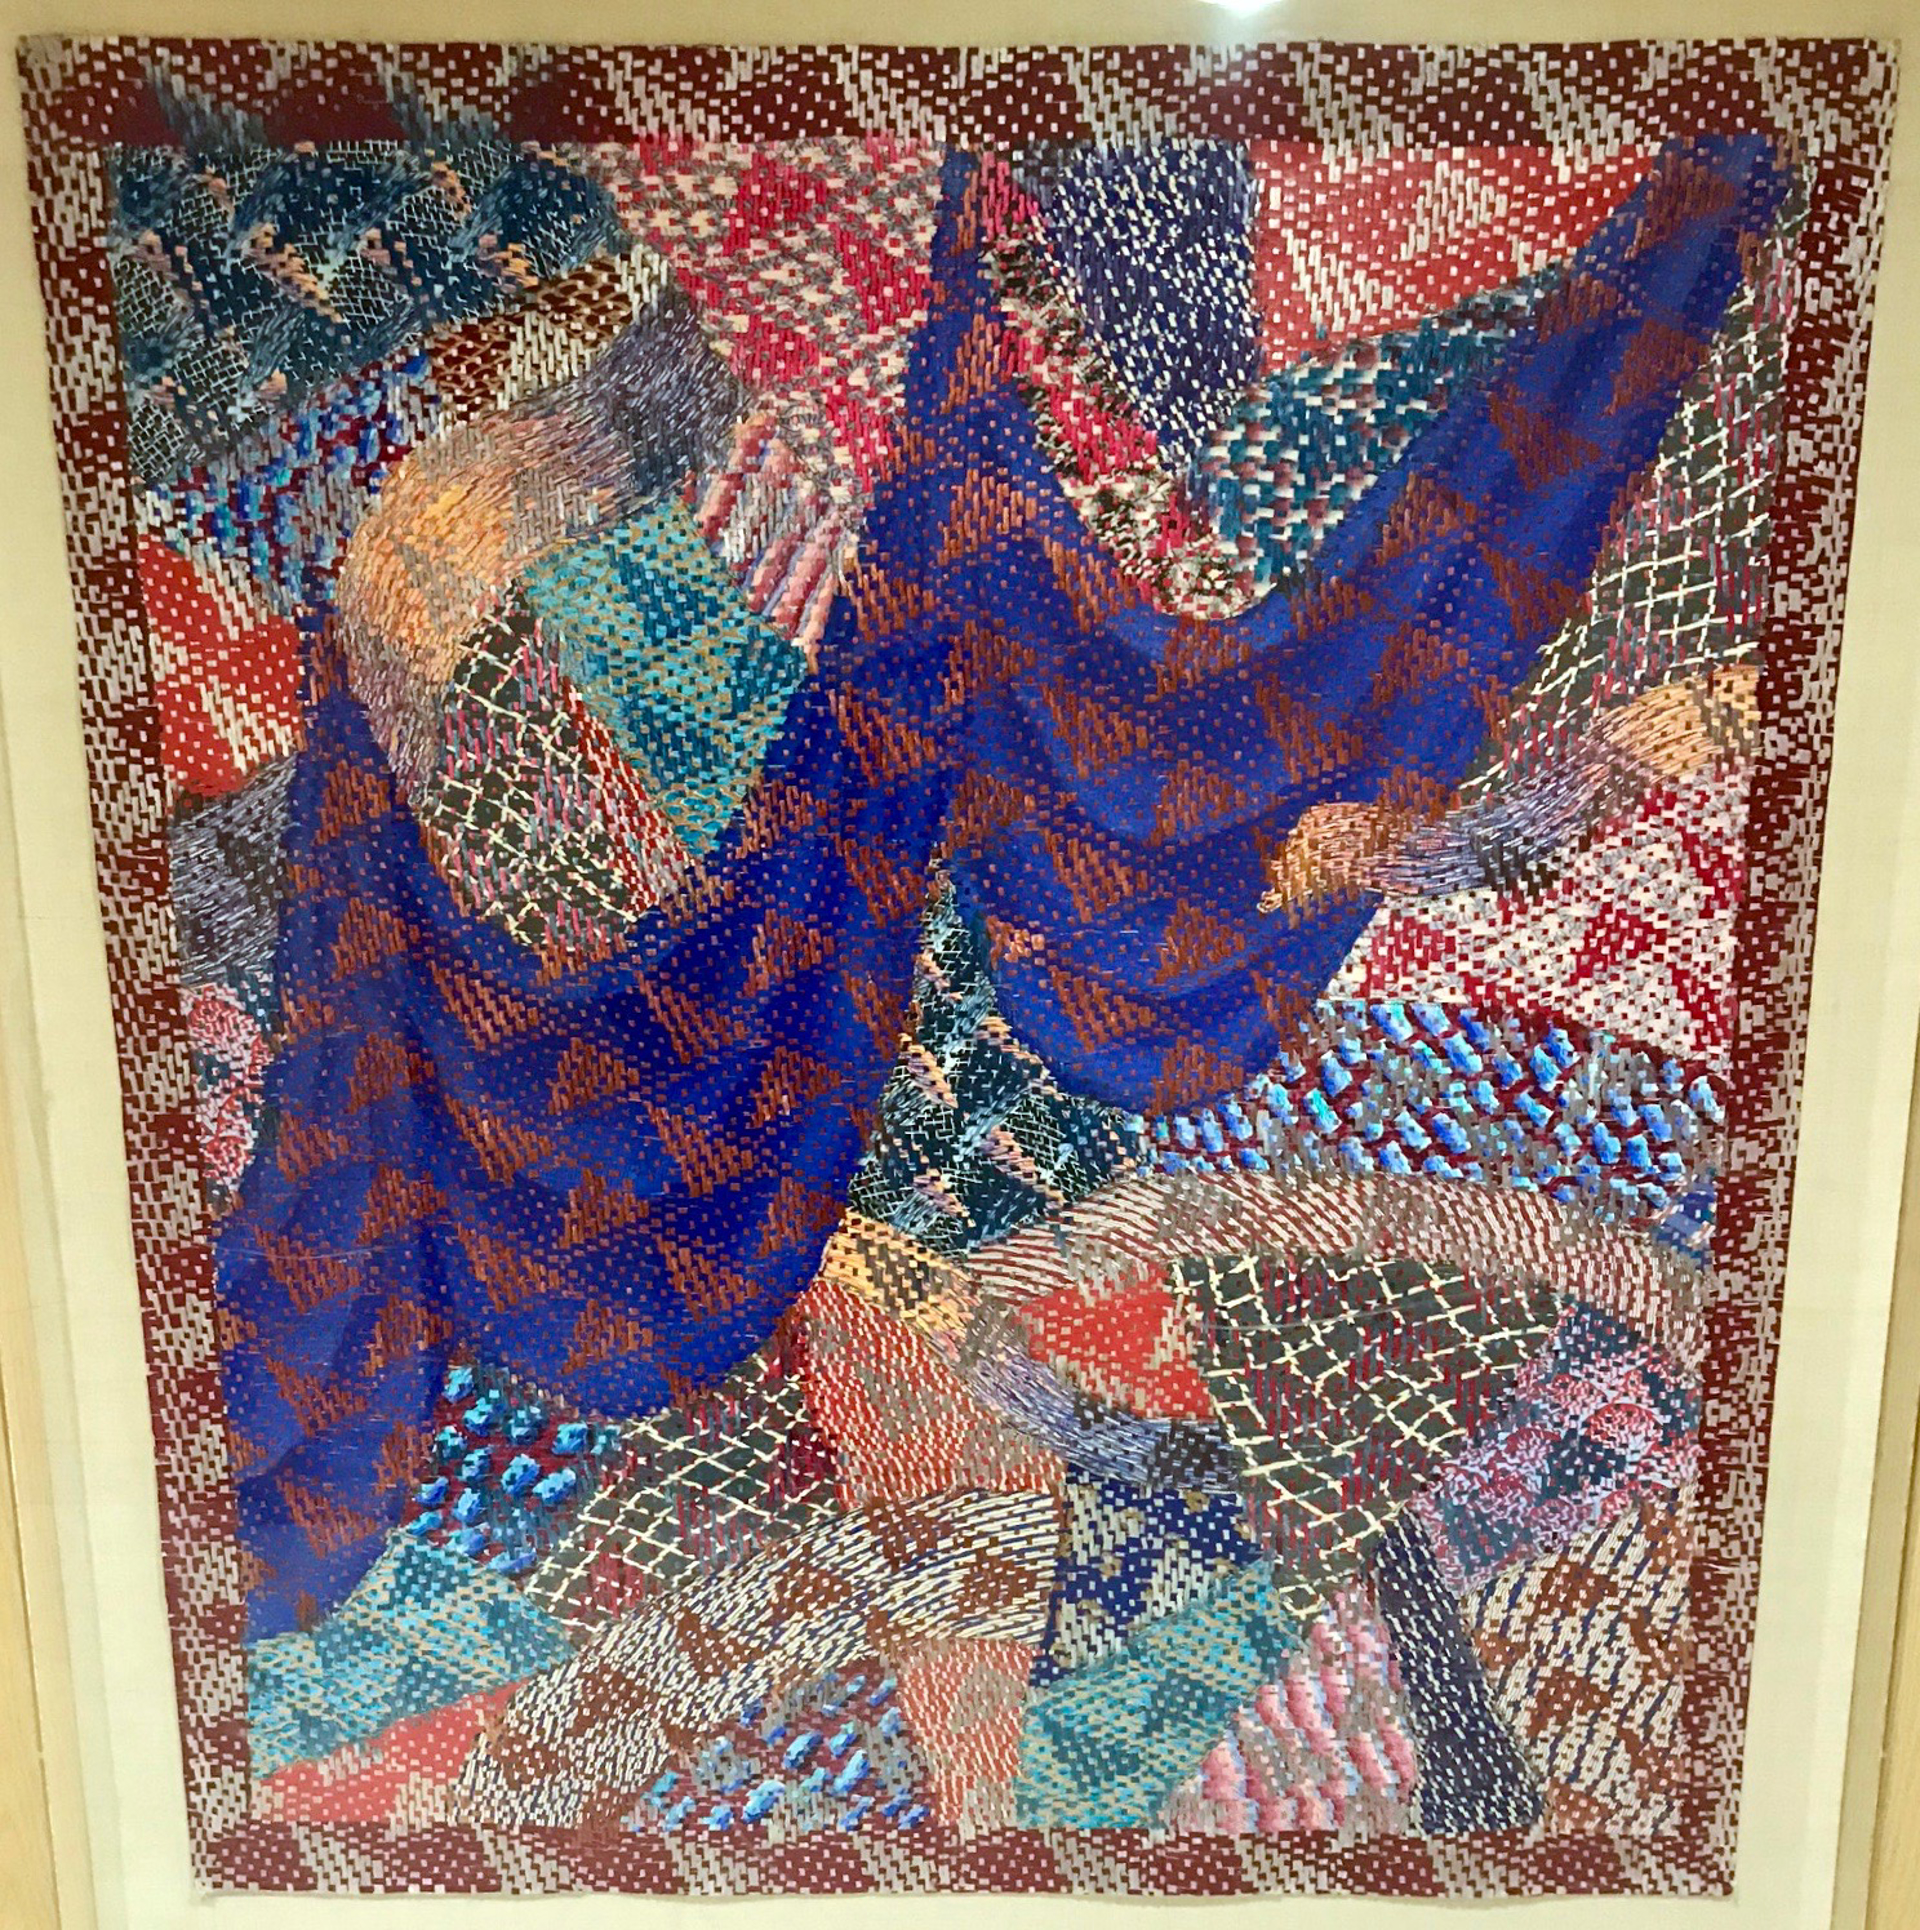 Crazy Quilt Royal Remnants II by Lia Cook